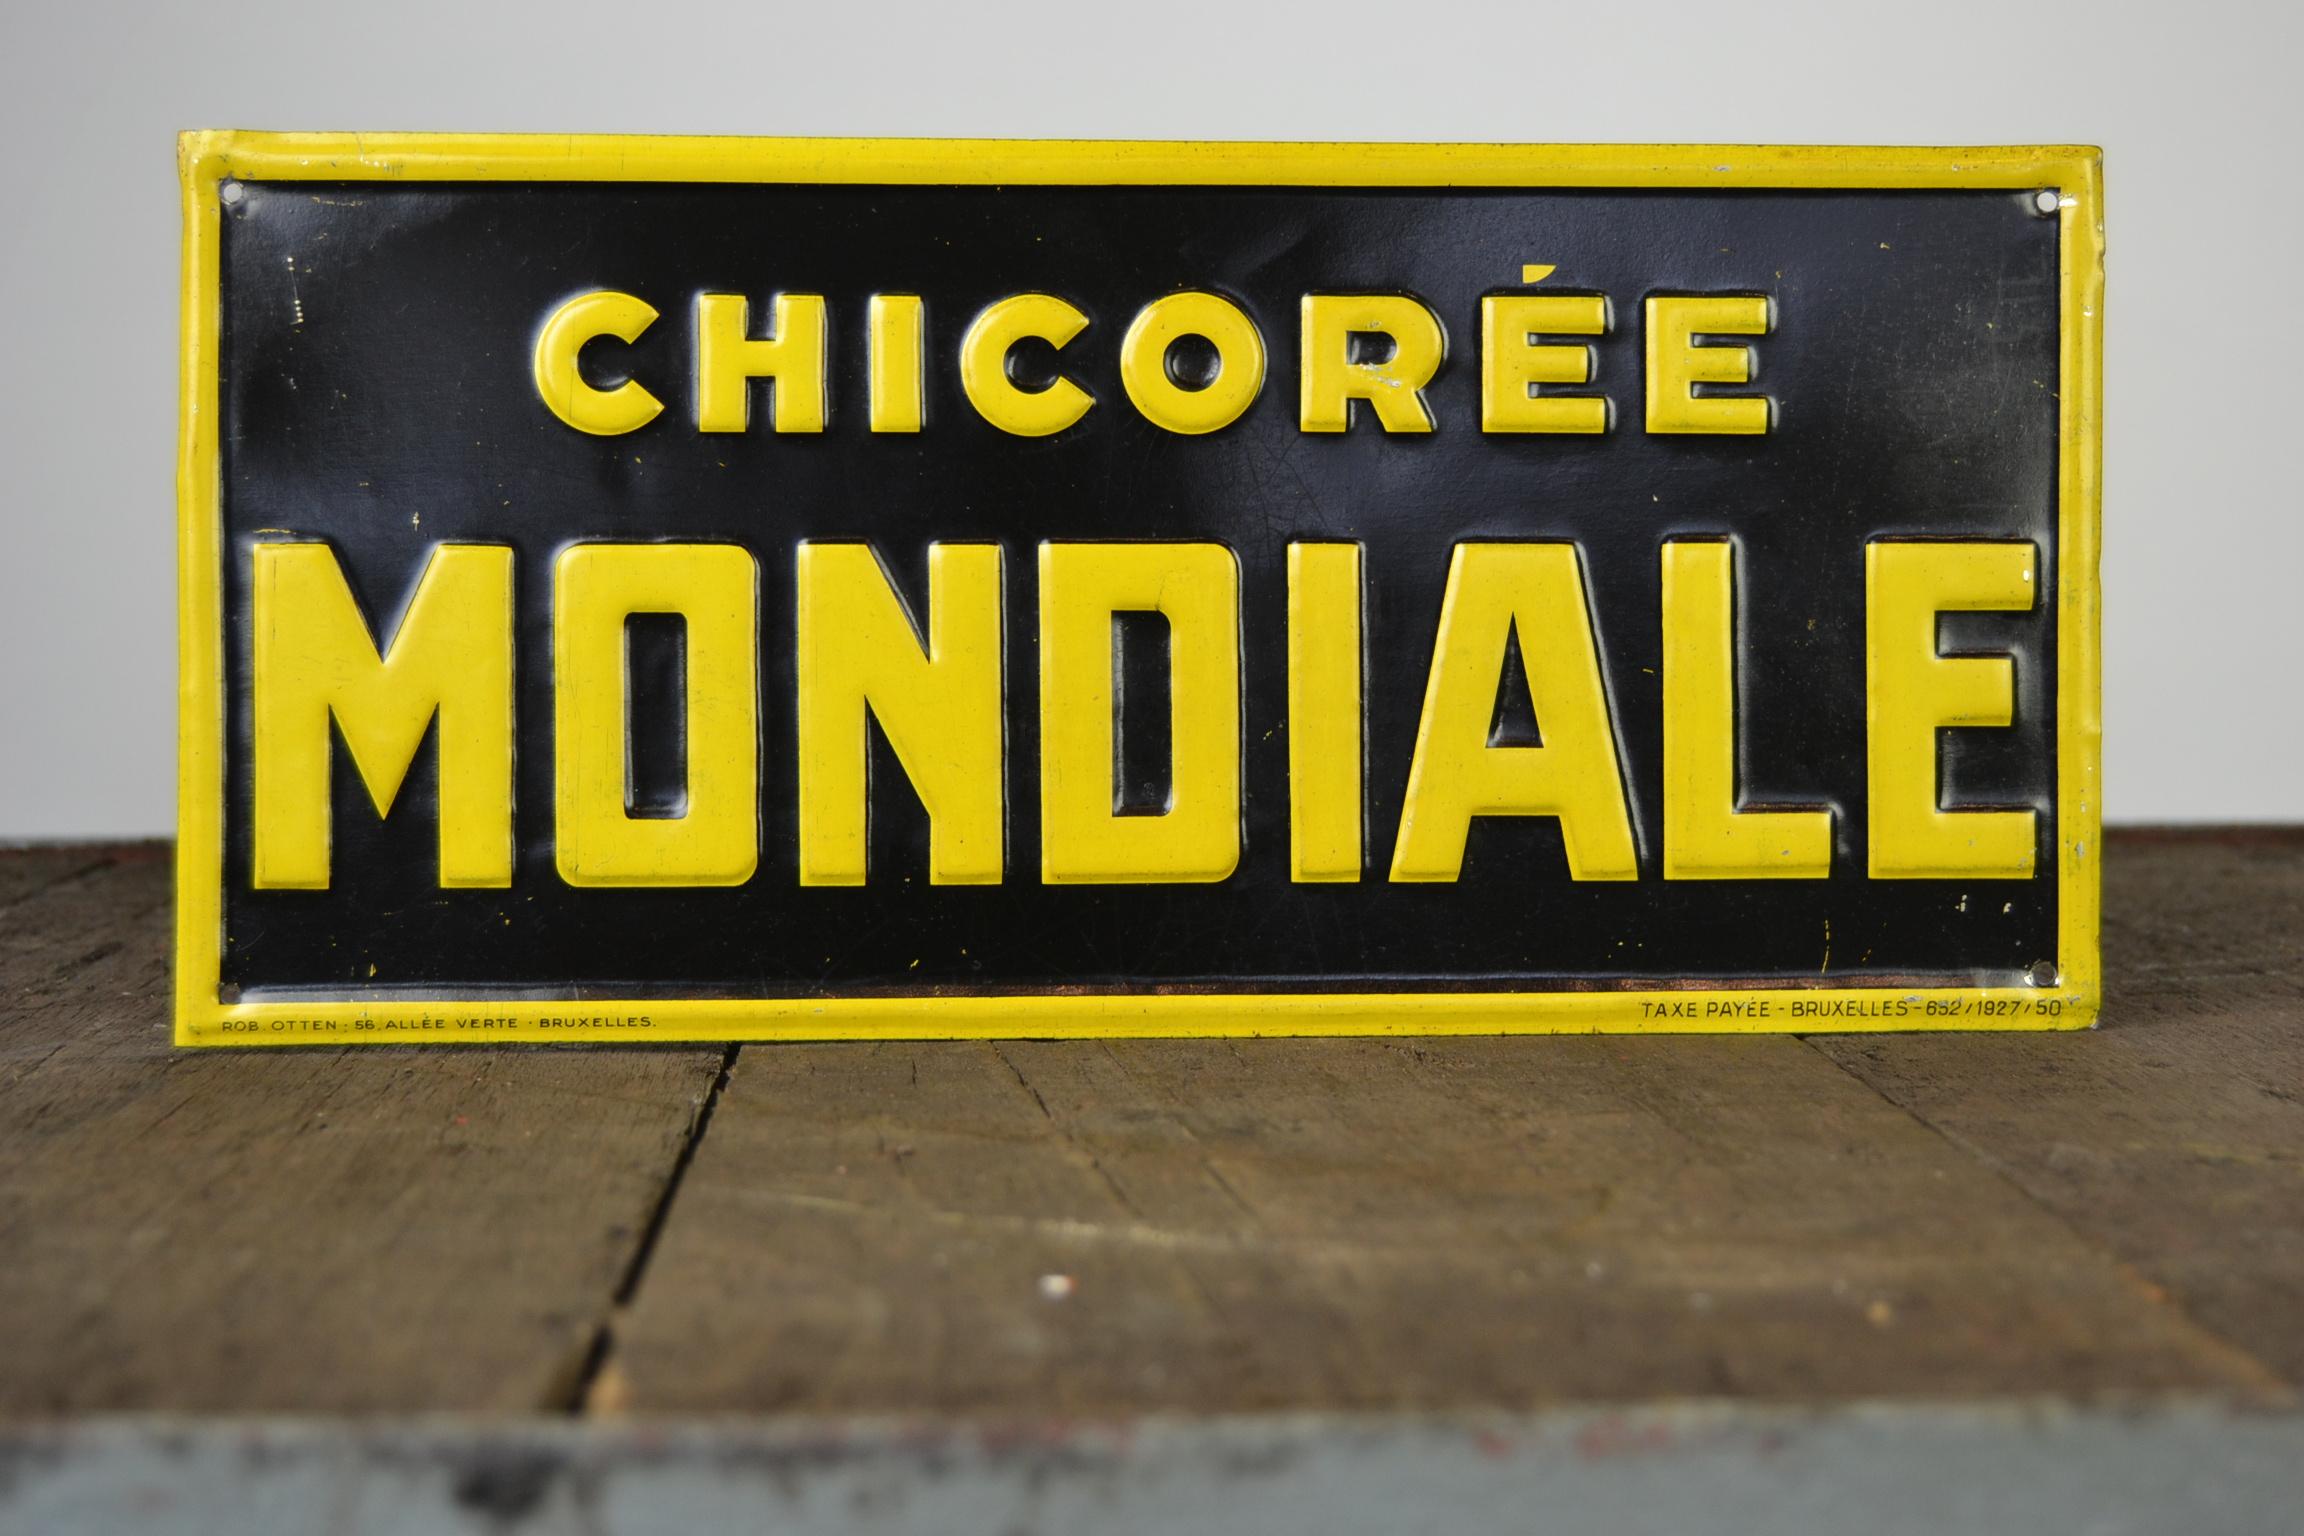 1920s Tin Advertising Sign for Chicorée Mondiale by Rob Otten, Belgium For Sale 4